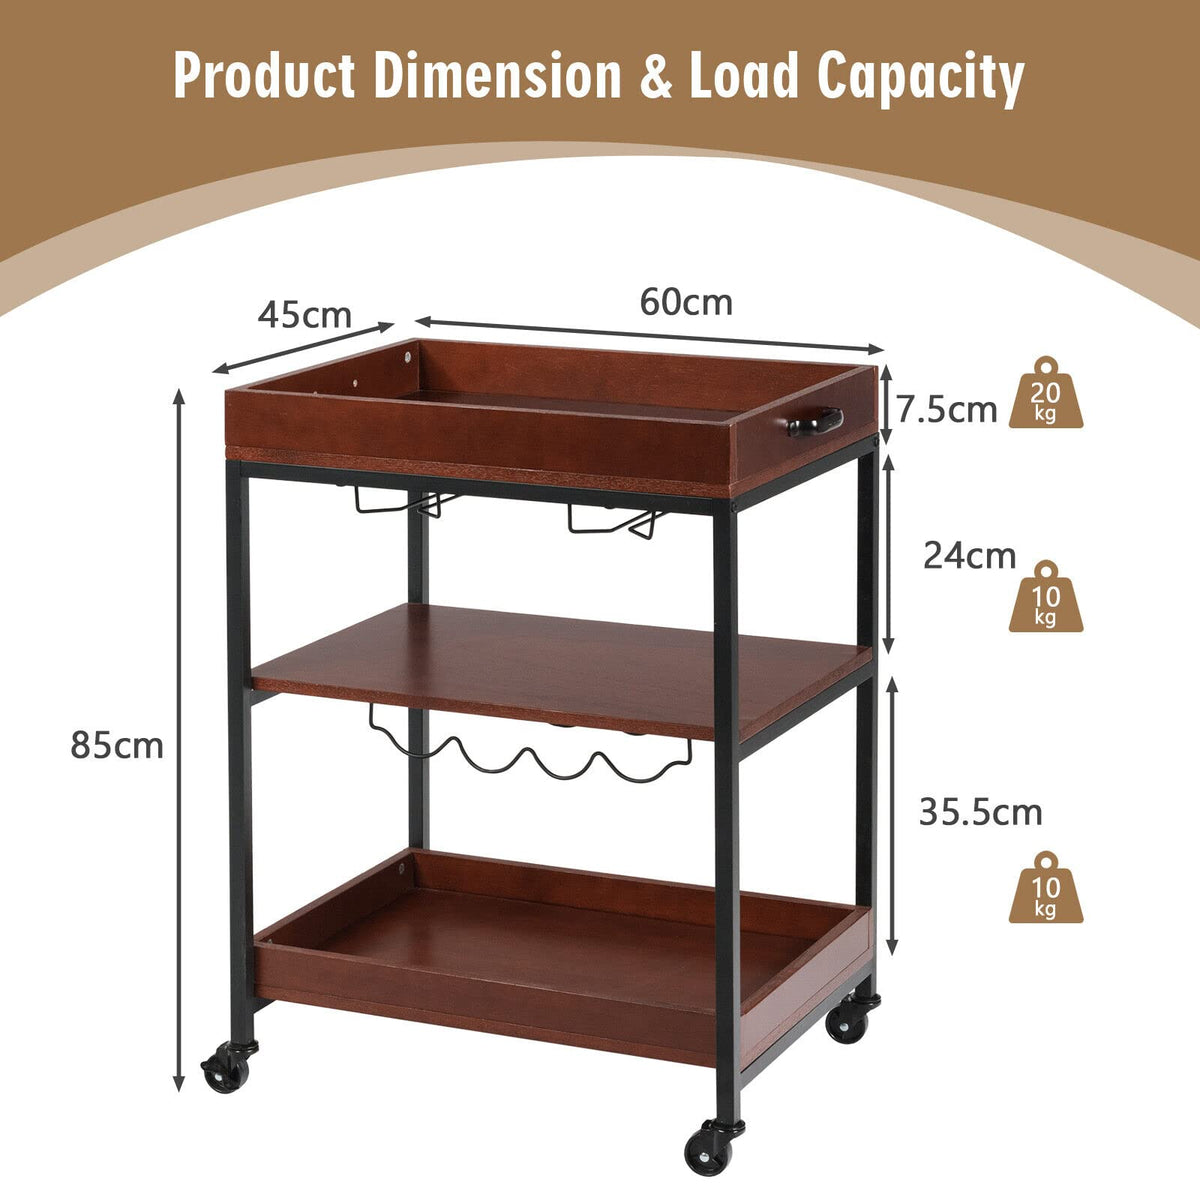 Giantex Kitchen Serving Trolley, 3-Tier Rolling Bar Island Serving Cart, Cart Trolley on Wheels with Handle